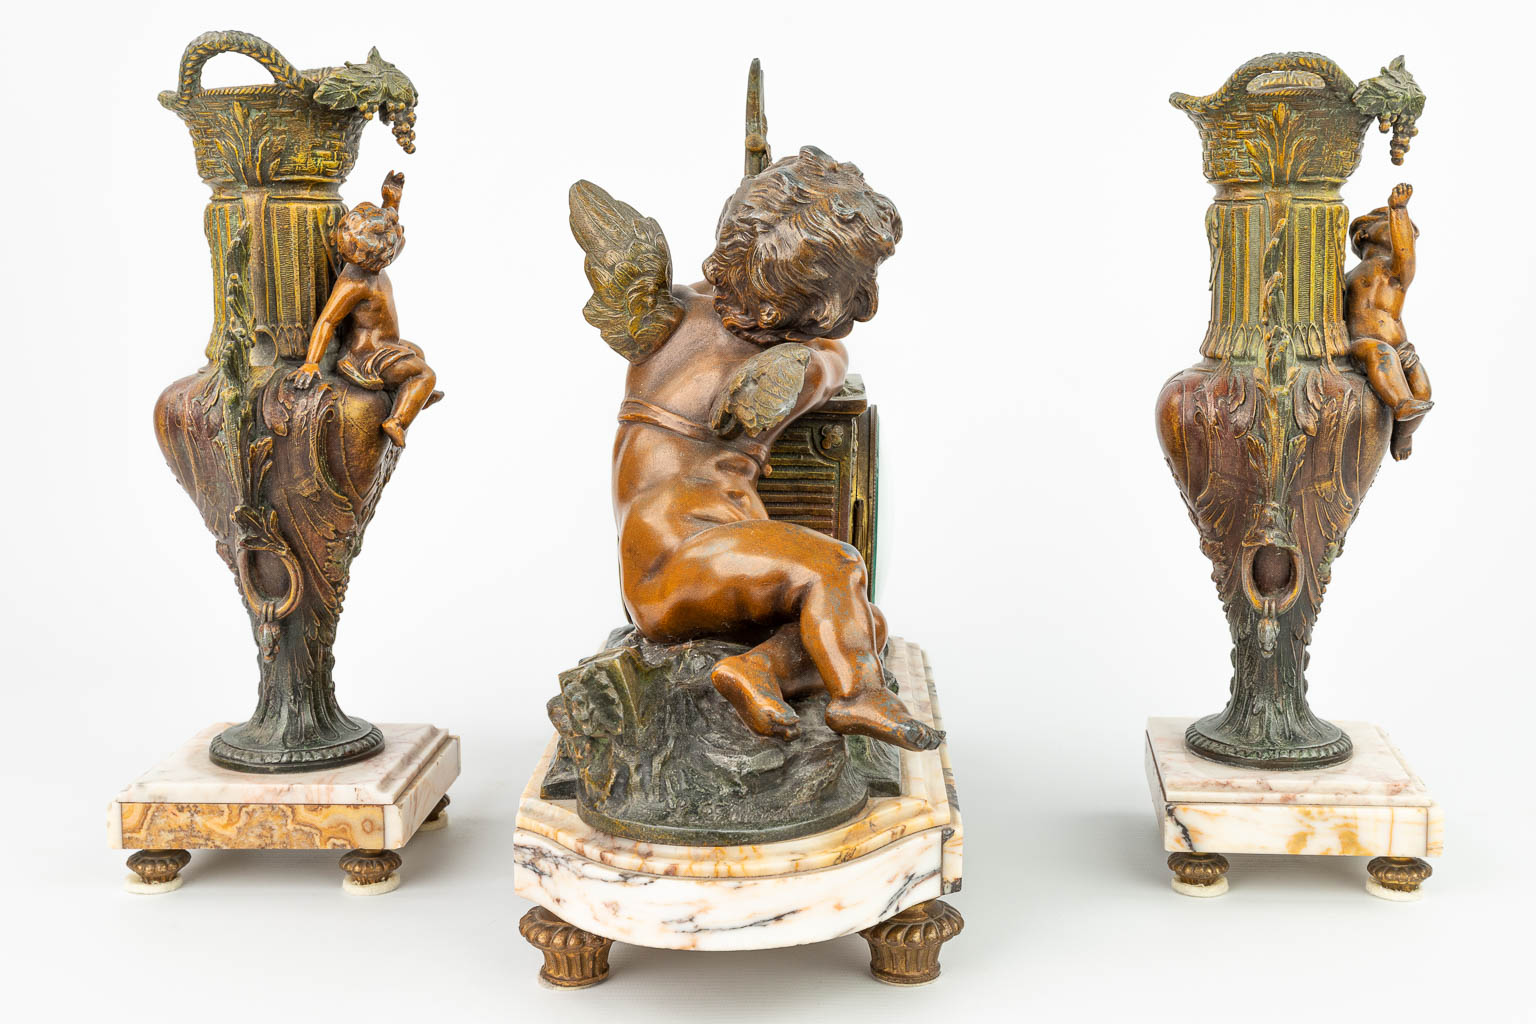 A three-piece mantle clock made of spelter and decorated with putti. (H:33cm)